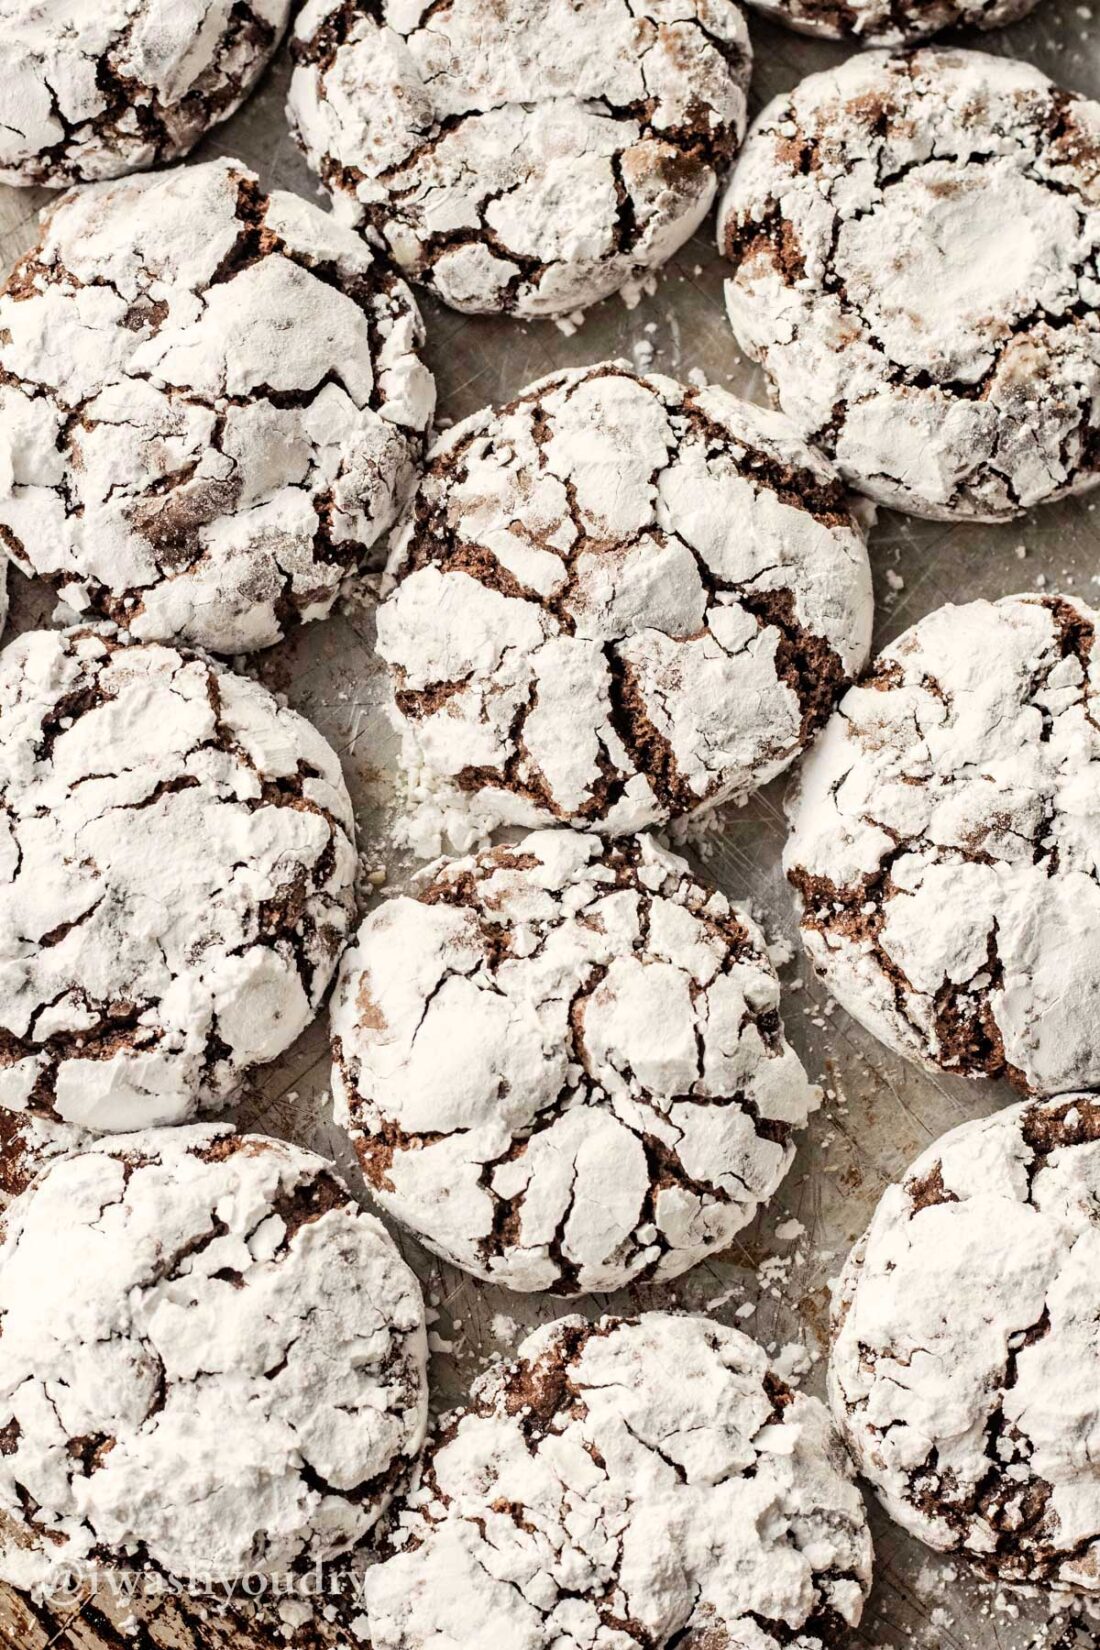 Baked chocolate crinkle cookies grouped together on metal pan.